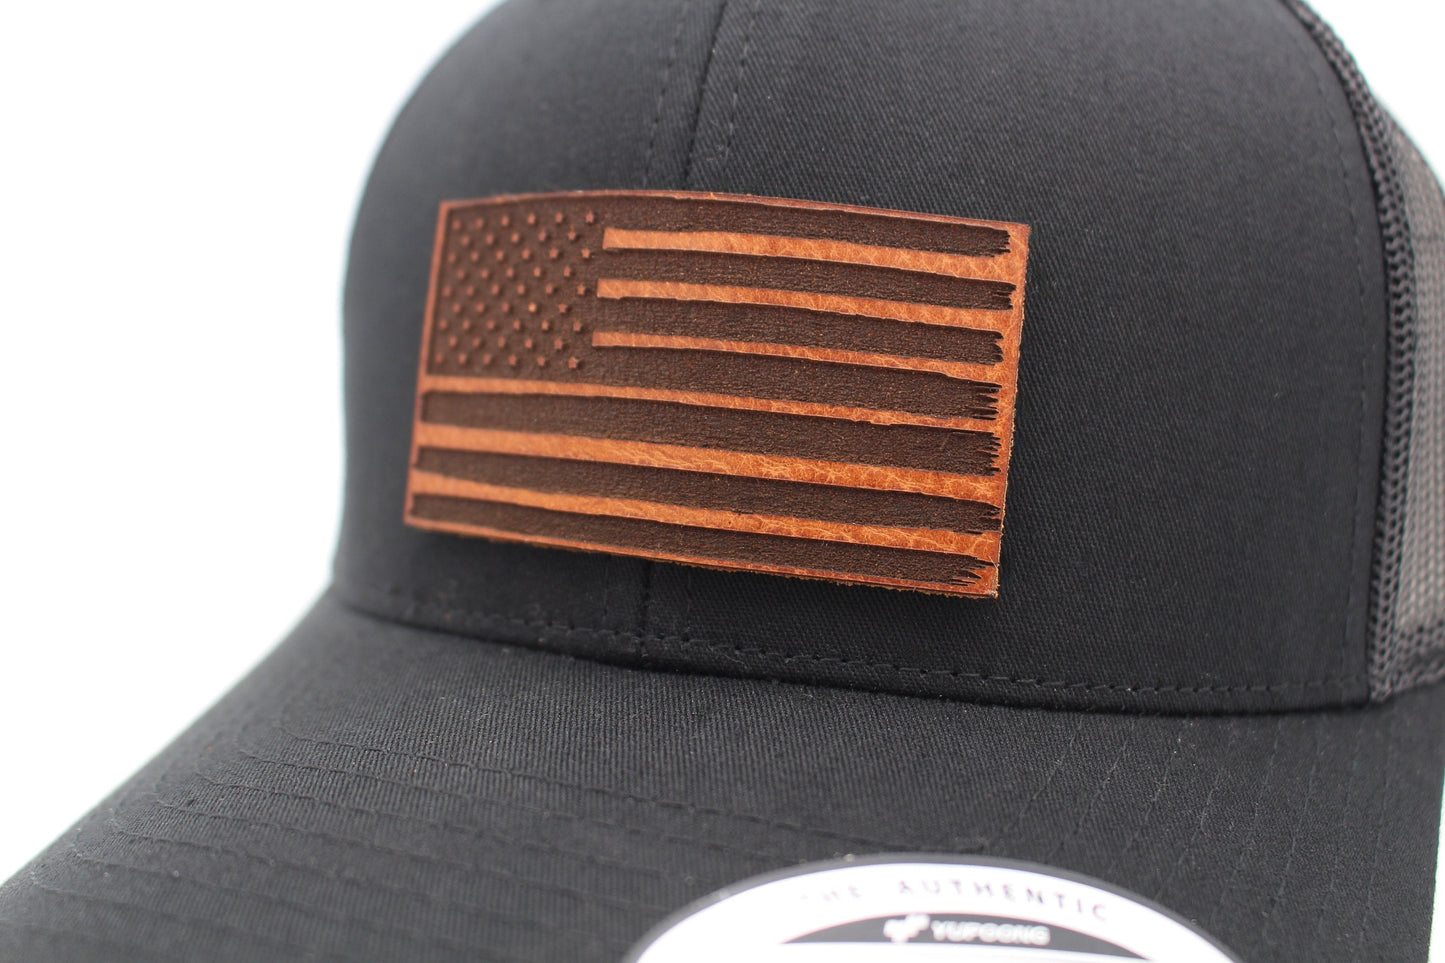 US Distressed American Flag Leather Patch Hat